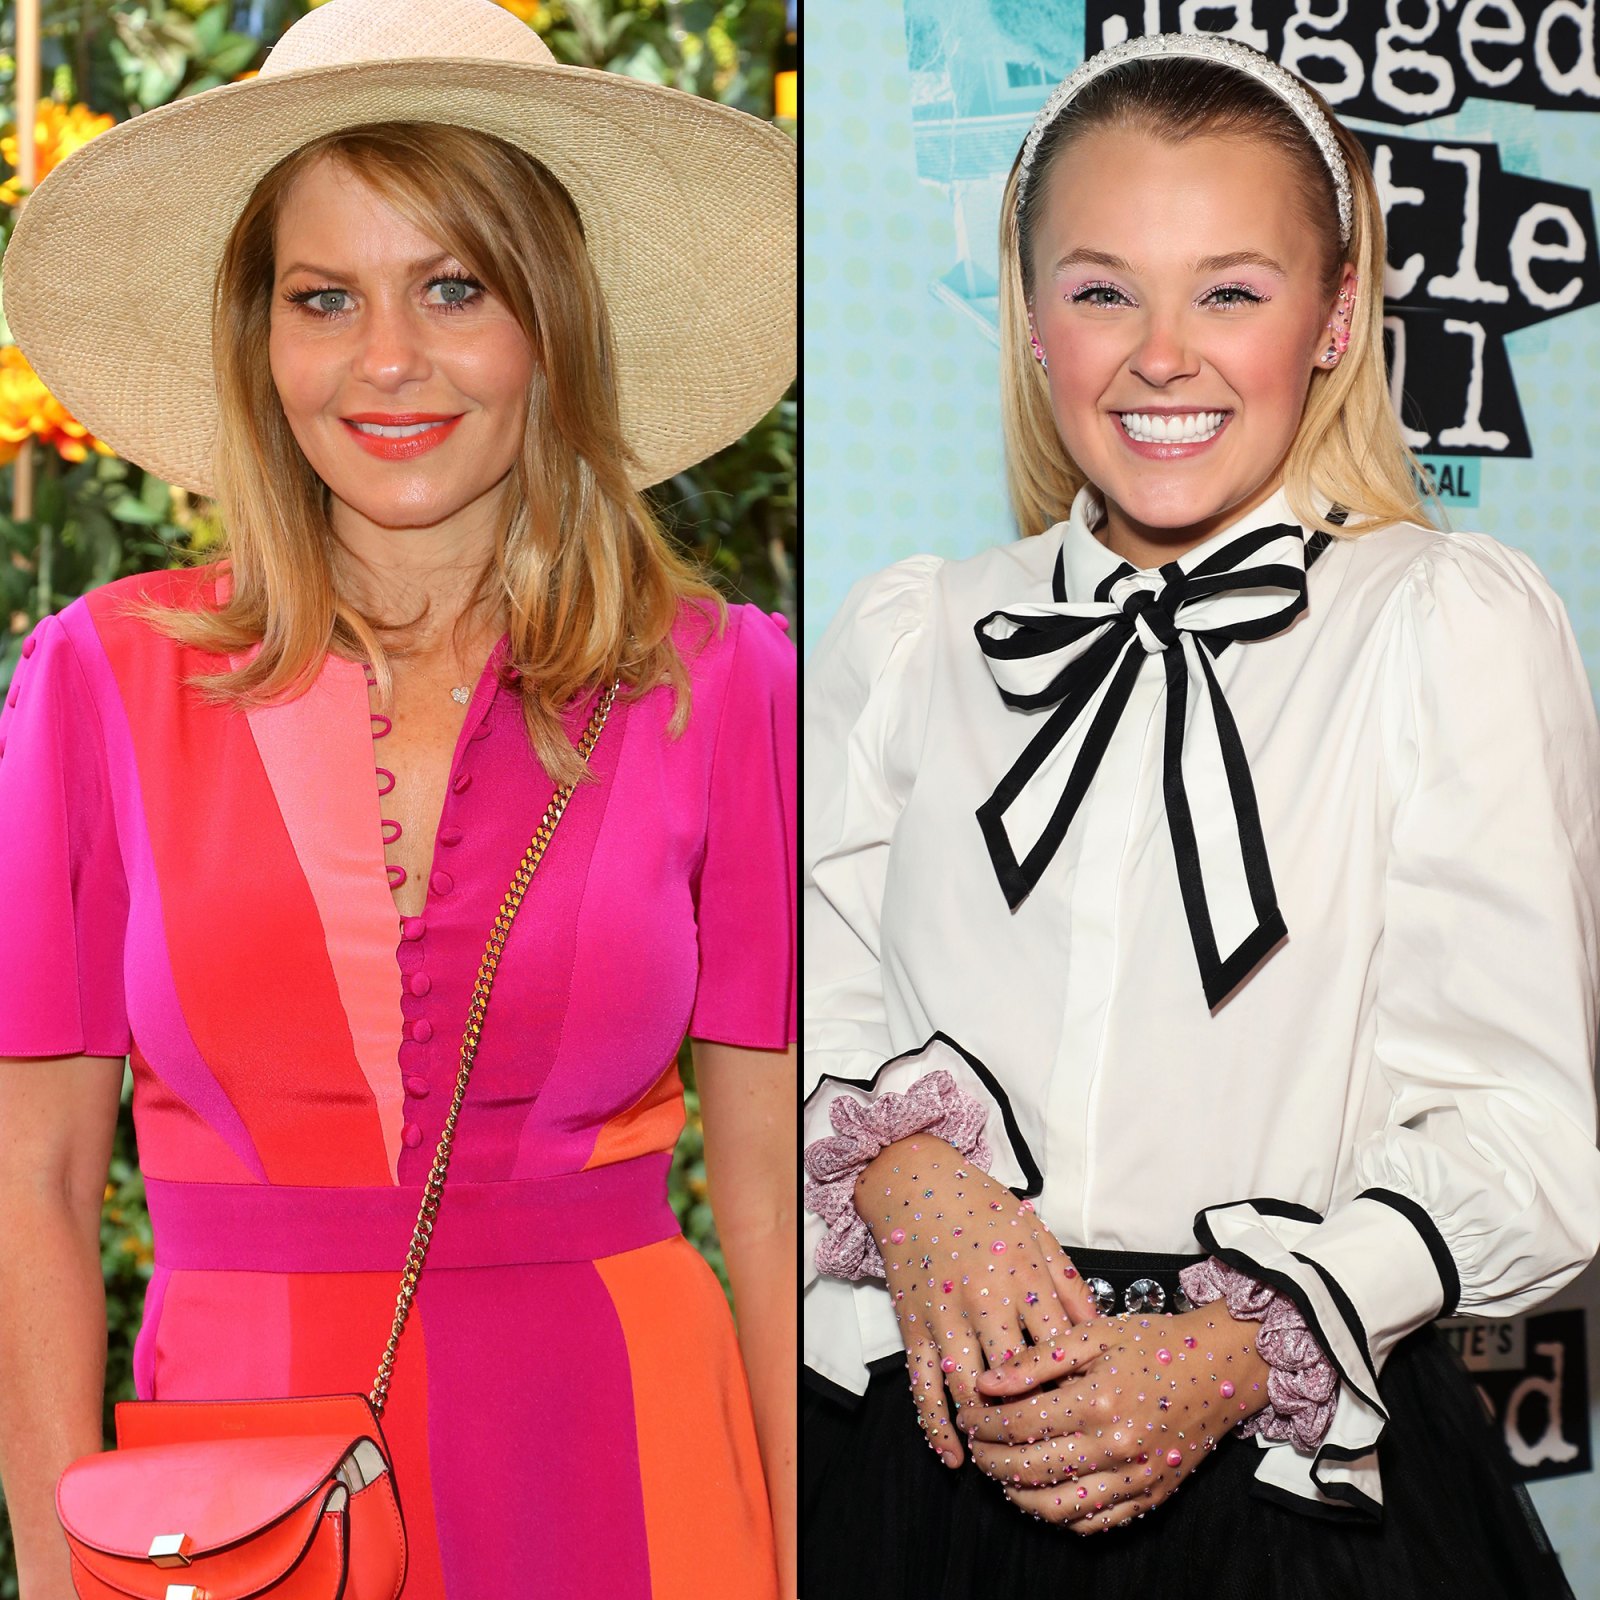 Stars Weigh In on Candace Cameron Bure's Controversial 'Traditional Marriage' Comments: JoJo Siwa, Jodie Sweetin and More